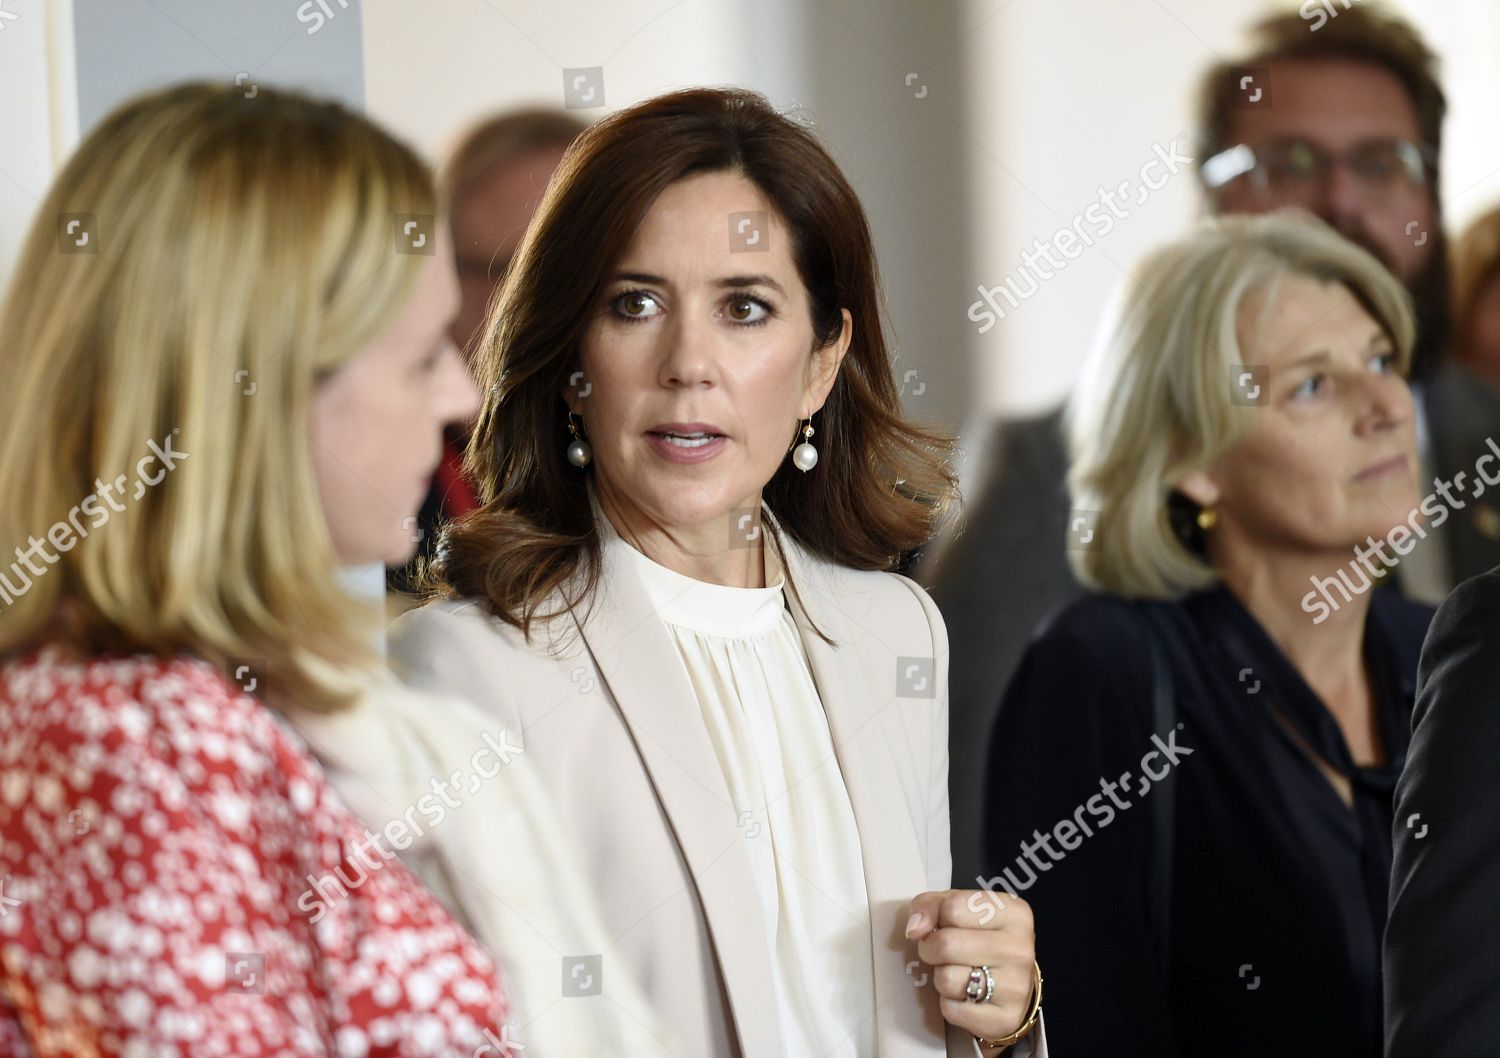 crown-princess-mary-visit-to-finland-shutterstock-editorial-9881096l.jpg